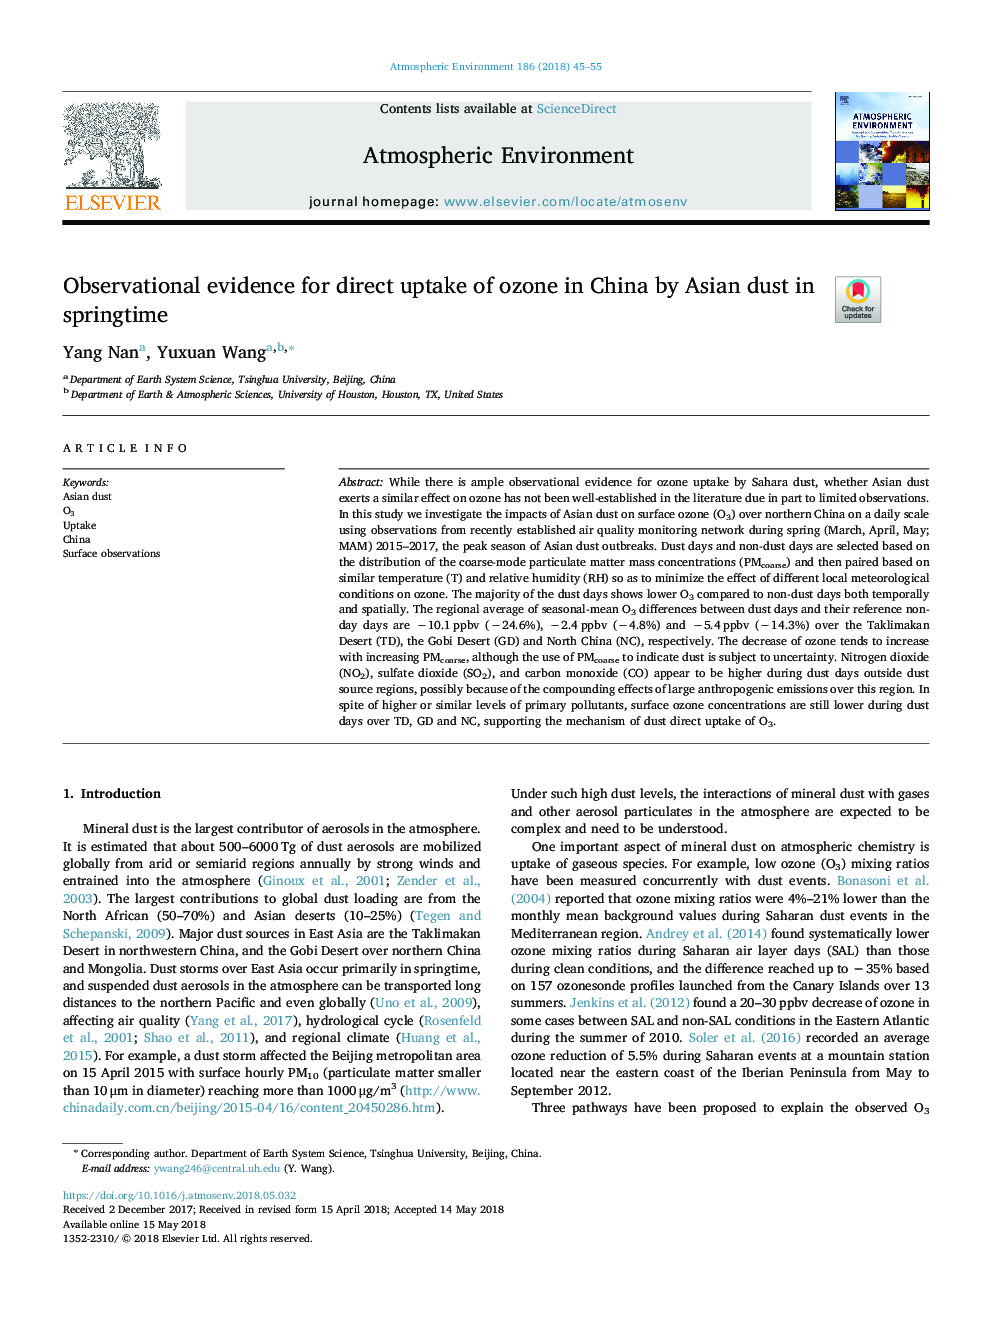 Observational evidence for direct uptake of ozone in China by Asian dust in springtime